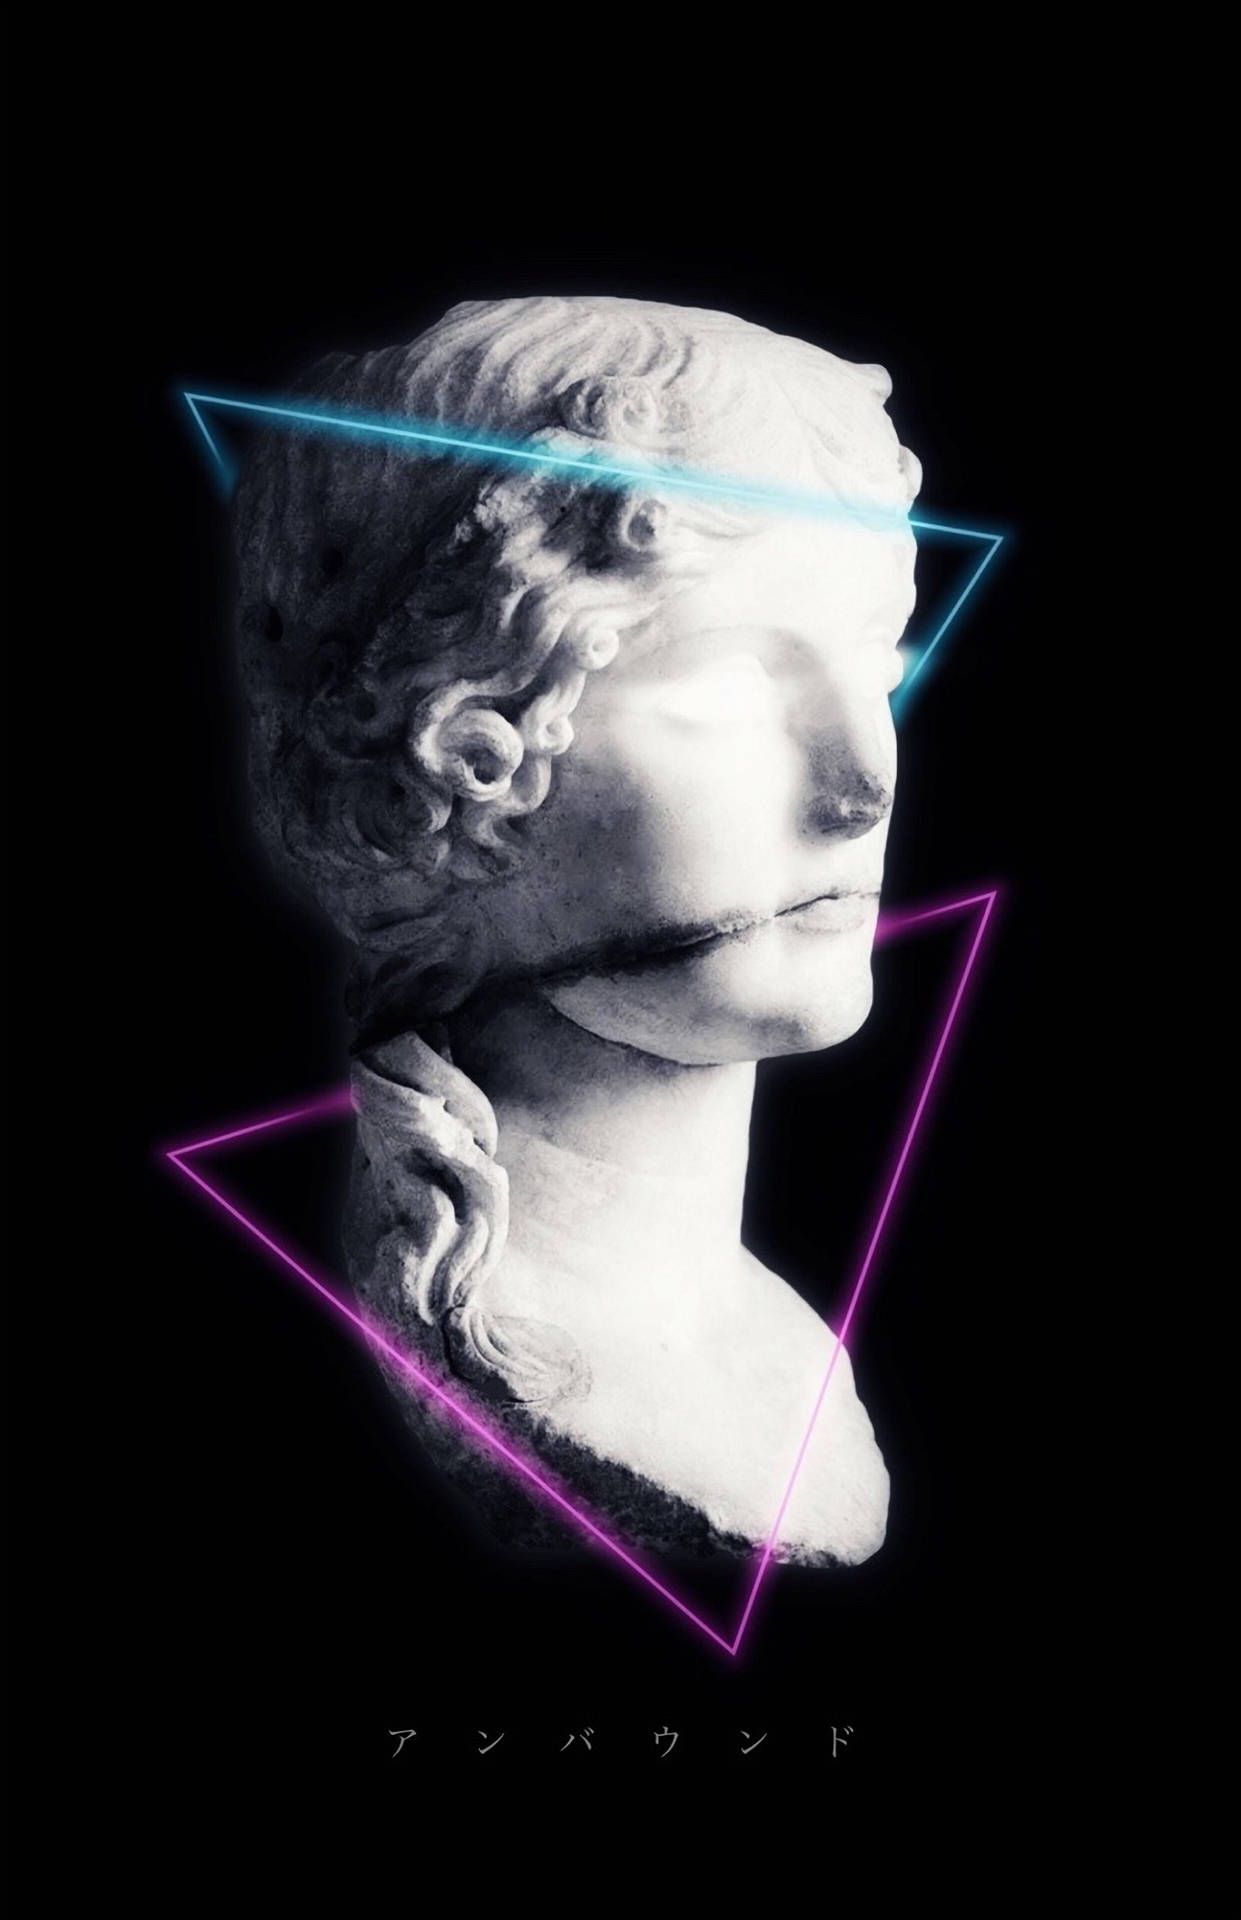 A poster for the movie, with an image of two triangles - Neon, Greek mythology